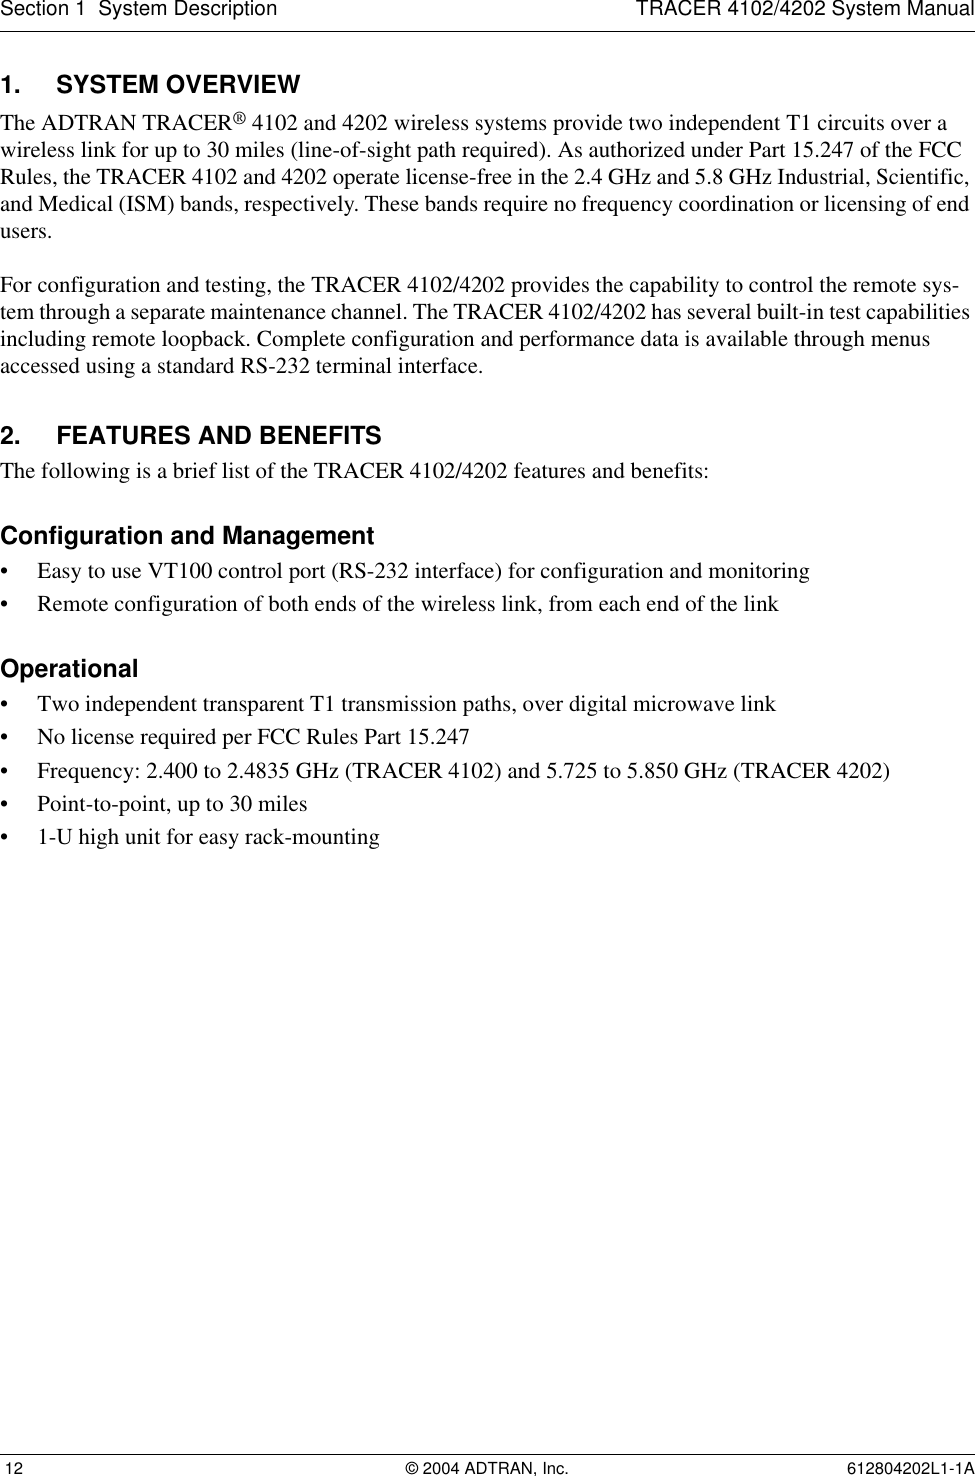 Section 1  System Description TRACER 4102/4202 System Manual 12 © 2004 ADTRAN, Inc. 612804202L1-1A1. SYSTEM OVERVIEWThe ADTRAN TRACER® 4102 and 4202 wireless systems provide two independent T1 circuits over a wireless link for up to 30 miles (line-of-sight path required). As authorized under Part 15.247 of the FCC Rules, the TRACER 4102 and 4202 operate license-free in the 2.4 GHz and 5.8 GHz Industrial, Scientific, and Medical (ISM) bands, respectively. These bands require no frequency coordination or licensing of end users.For configuration and testing, the TRACER 4102/4202 provides the capability to control the remote sys-tem through a separate maintenance channel. The TRACER 4102/4202 has several built-in test capabilities including remote loopback. Complete configuration and performance data is available through menus accessed using a standard RS-232 terminal interface.2. FEATURES AND BENEFITSThe following is a brief list of the TRACER 4102/4202 features and benefits:Configuration and Management• Easy to use VT100 control port (RS-232 interface) for configuration and monitoring• Remote configuration of both ends of the wireless link, from each end of the linkOperational• Two independent transparent T1 transmission paths, over digital microwave link• No license required per FCC Rules Part 15.247• Frequency: 2.400 to 2.4835 GHz (TRACER 4102) and 5.725 to 5.850 GHz (TRACER 4202)• Point-to-point, up to 30 miles• 1-U high unit for easy rack-mounting